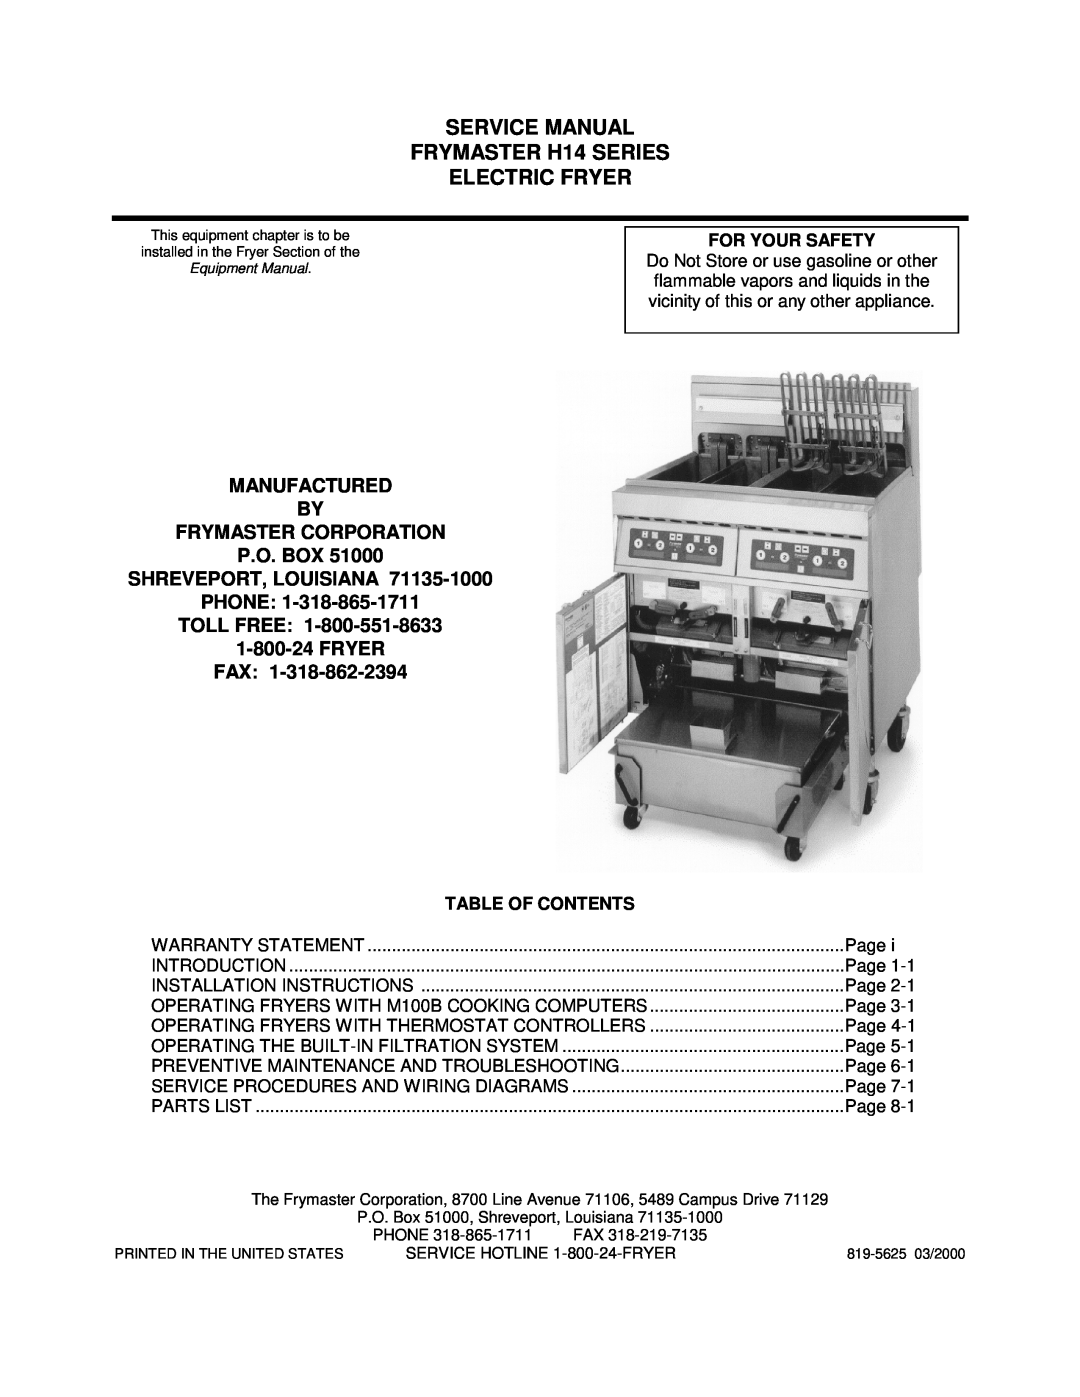 Frymaster H14 Series service manual SERVICE MANUAL FRYMASTER H14 SERIES ELECTRIC FRYER, PHONE TOLL FREE 1-800-24 FRYER FAX 